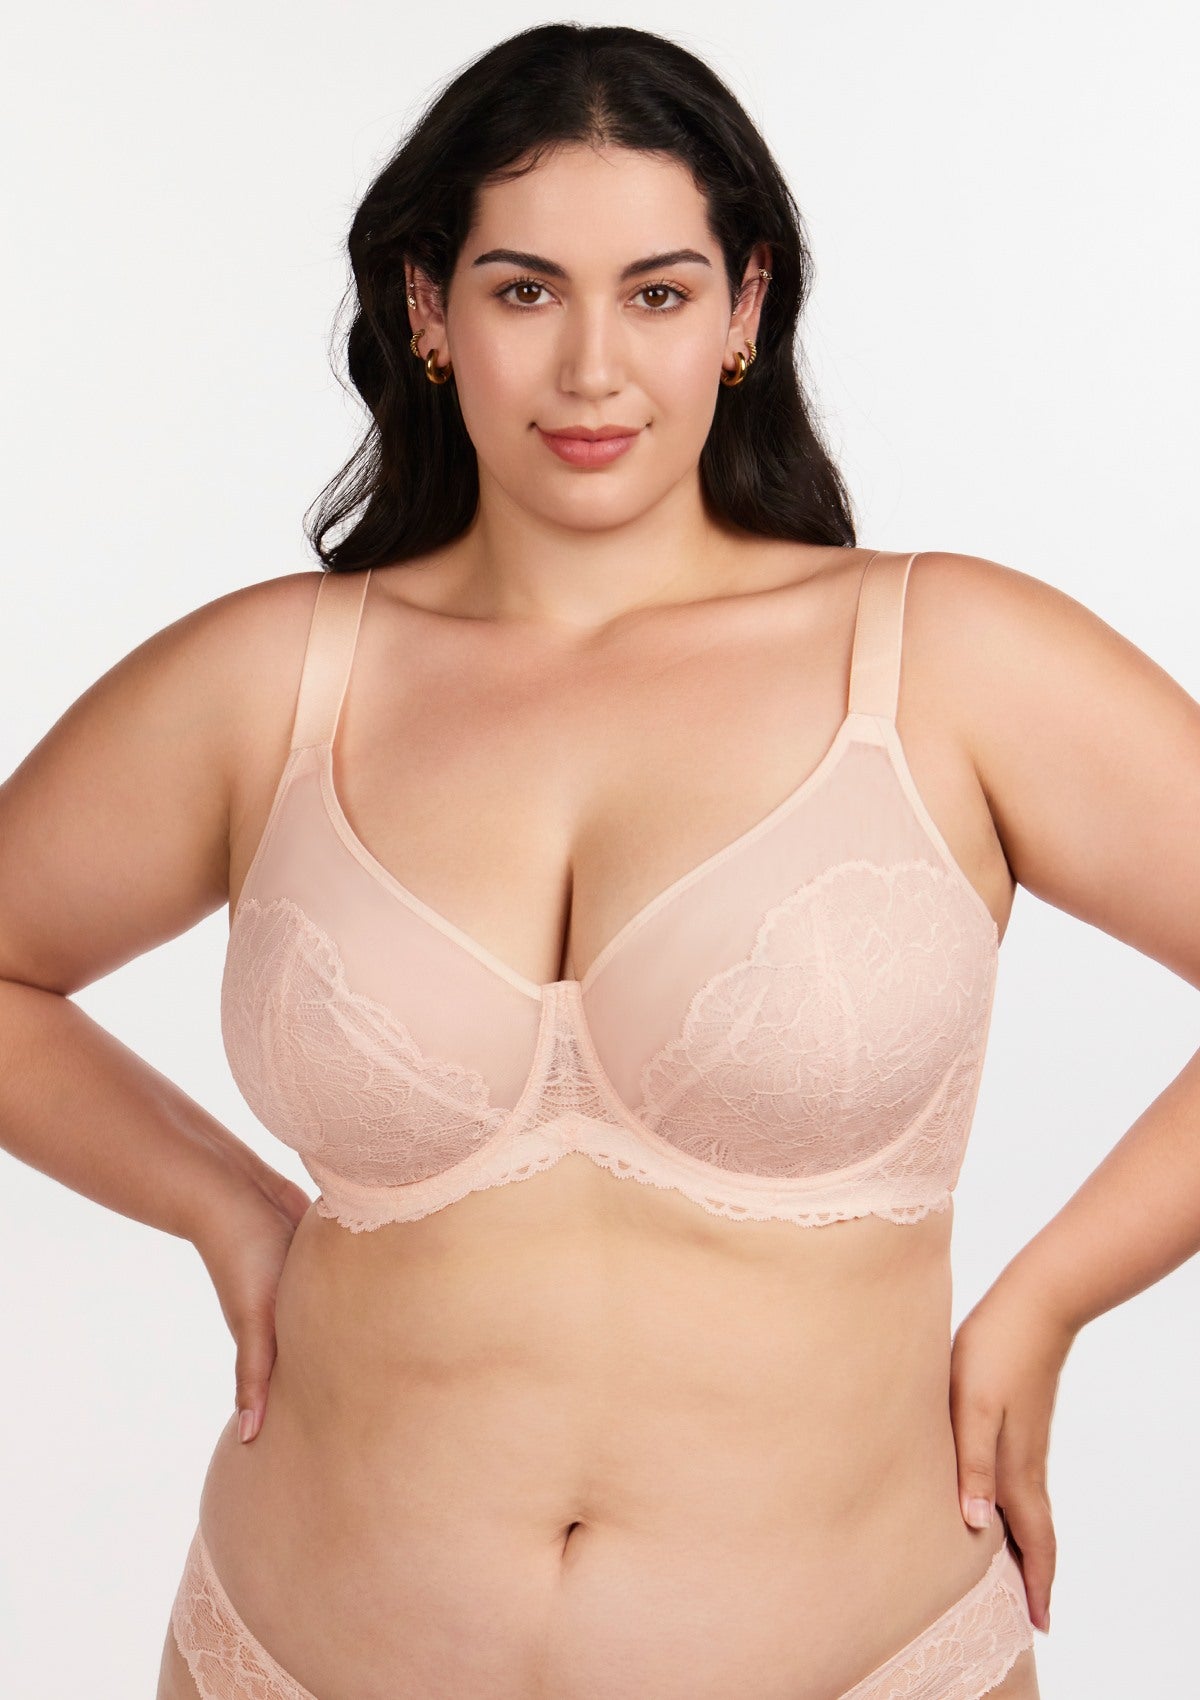 HSIA Blossom Sheer Lace Bra: Comfortable Underwire Bra For Big Busts - Dusty Peach / 36 / I